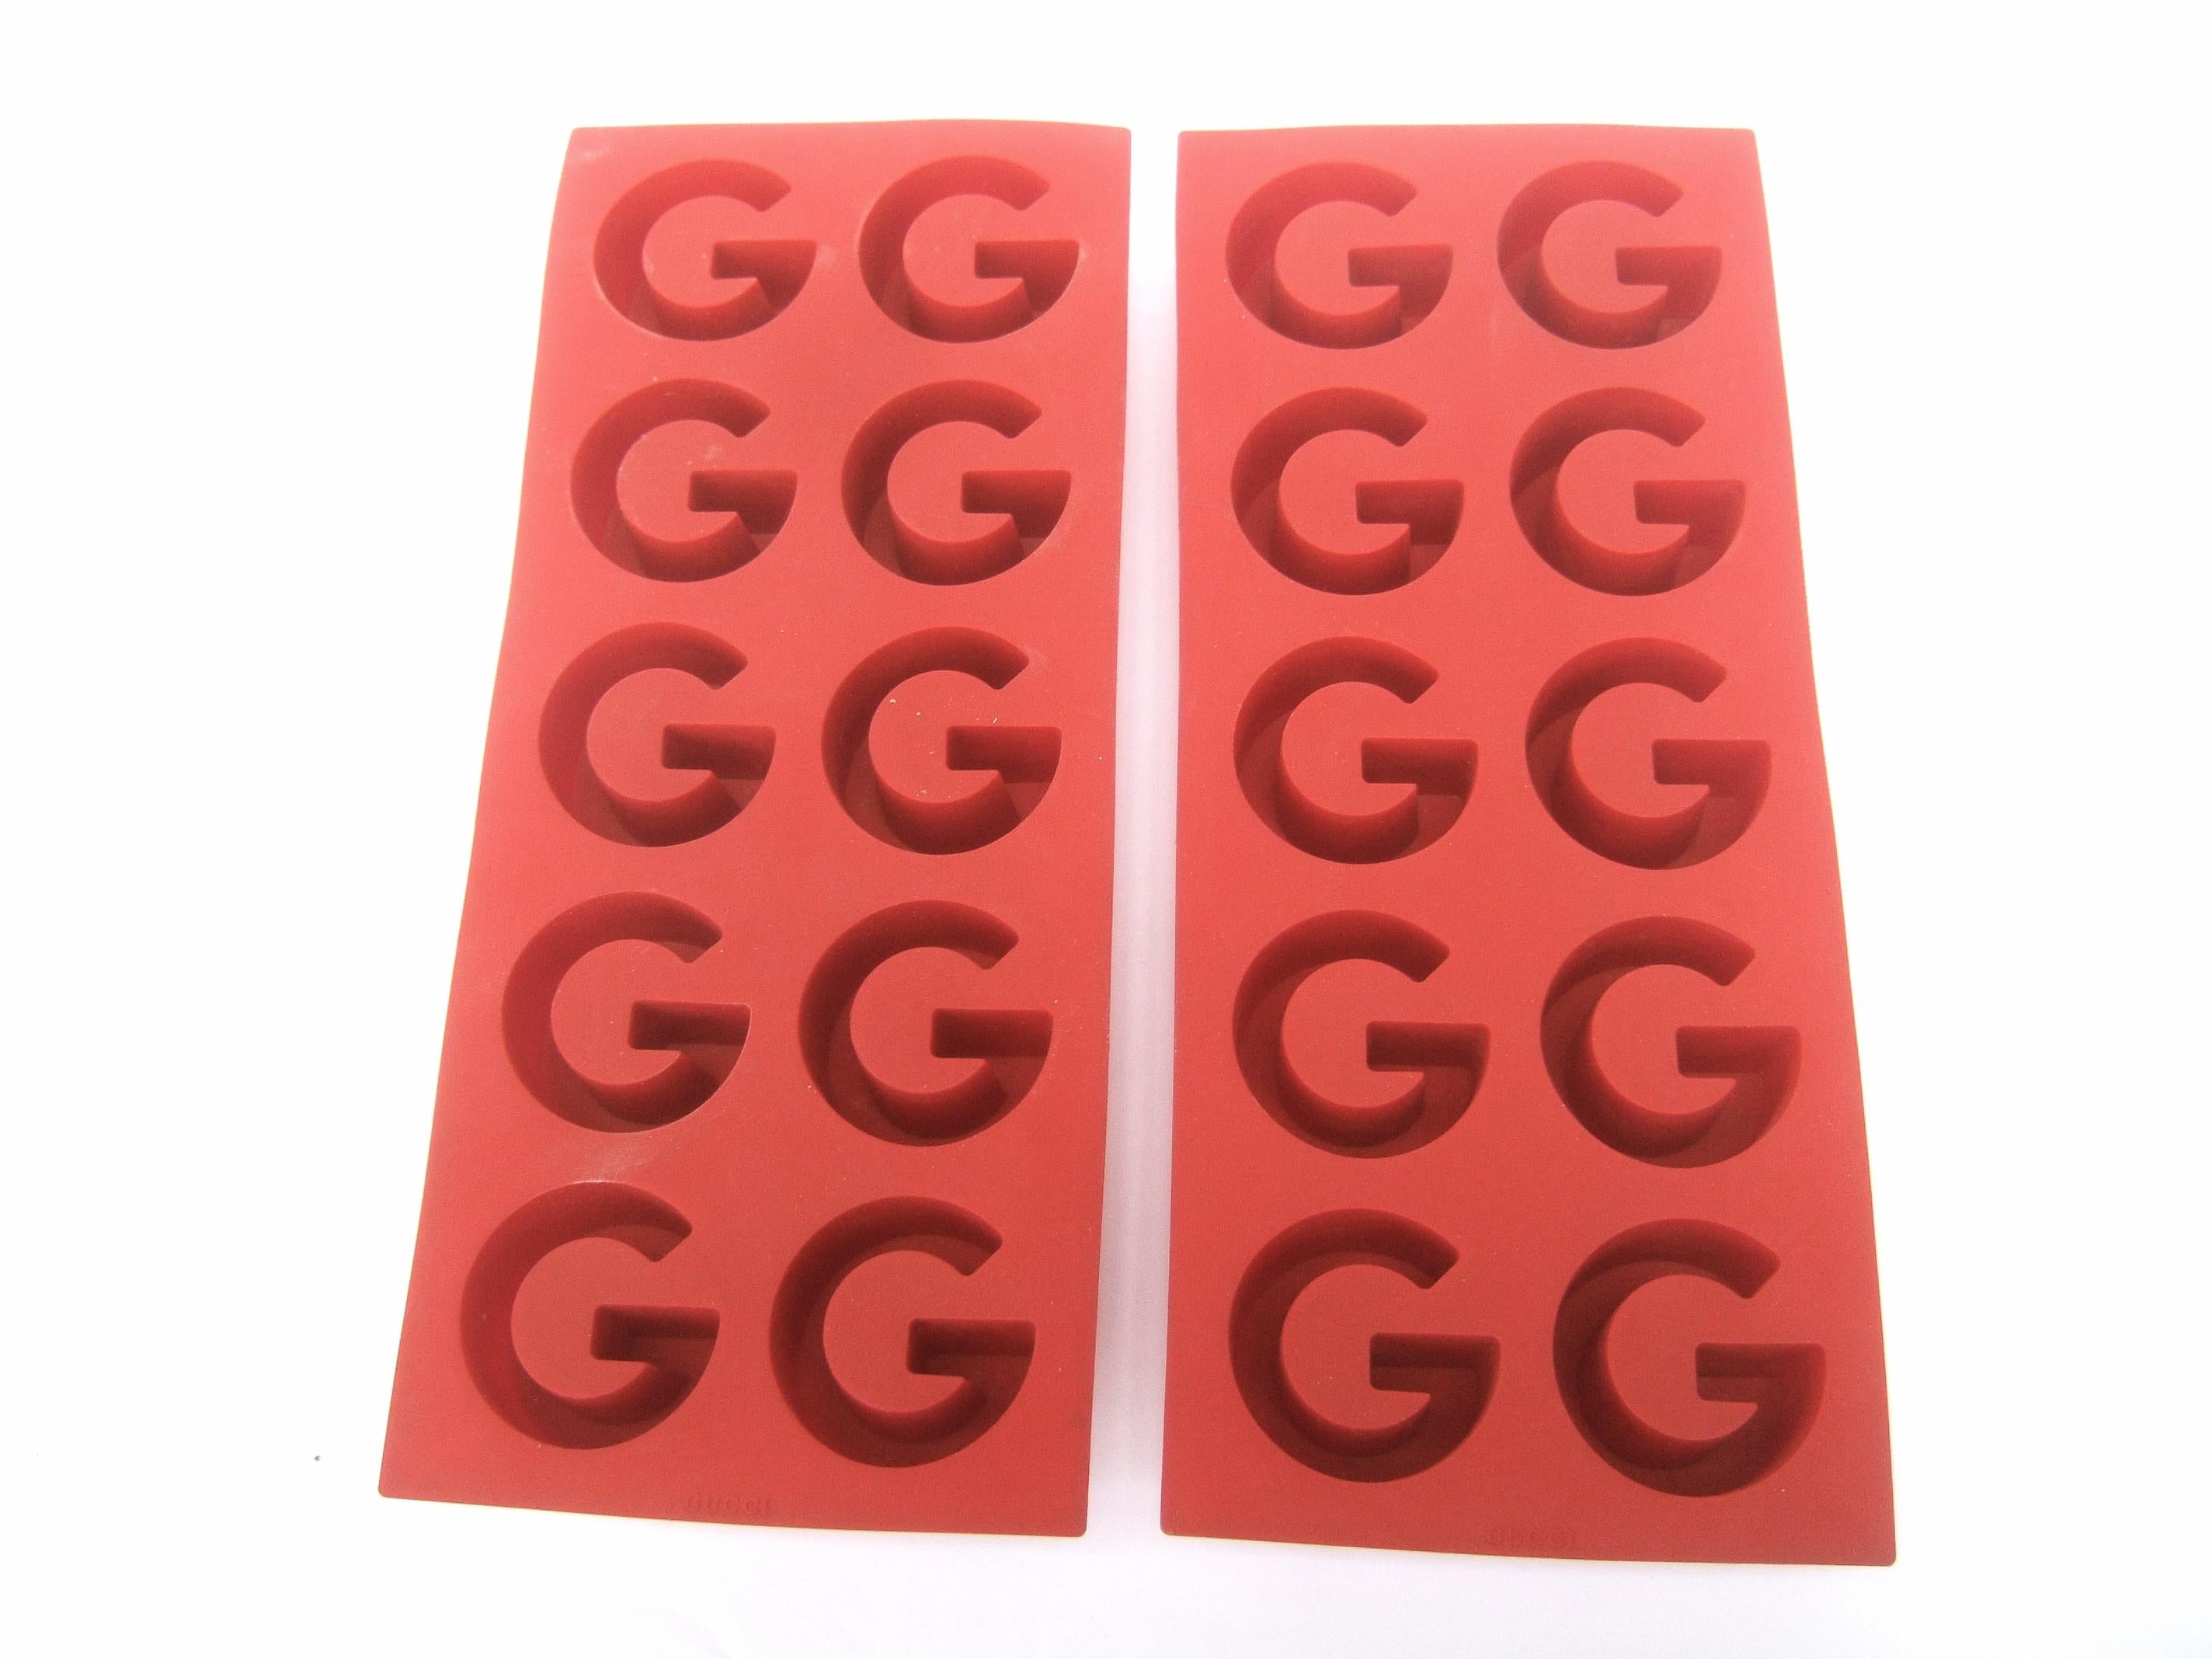 GUCCI Italy Pair of rubber ice tray molds c 1980s
The set of rubber ice trays are designed with Gucci's
iconic G initials throughout 

Makes a stylish barware accessory perfect for entertaining  
The rubber molds are stamped Gucci Italy 
Each tray